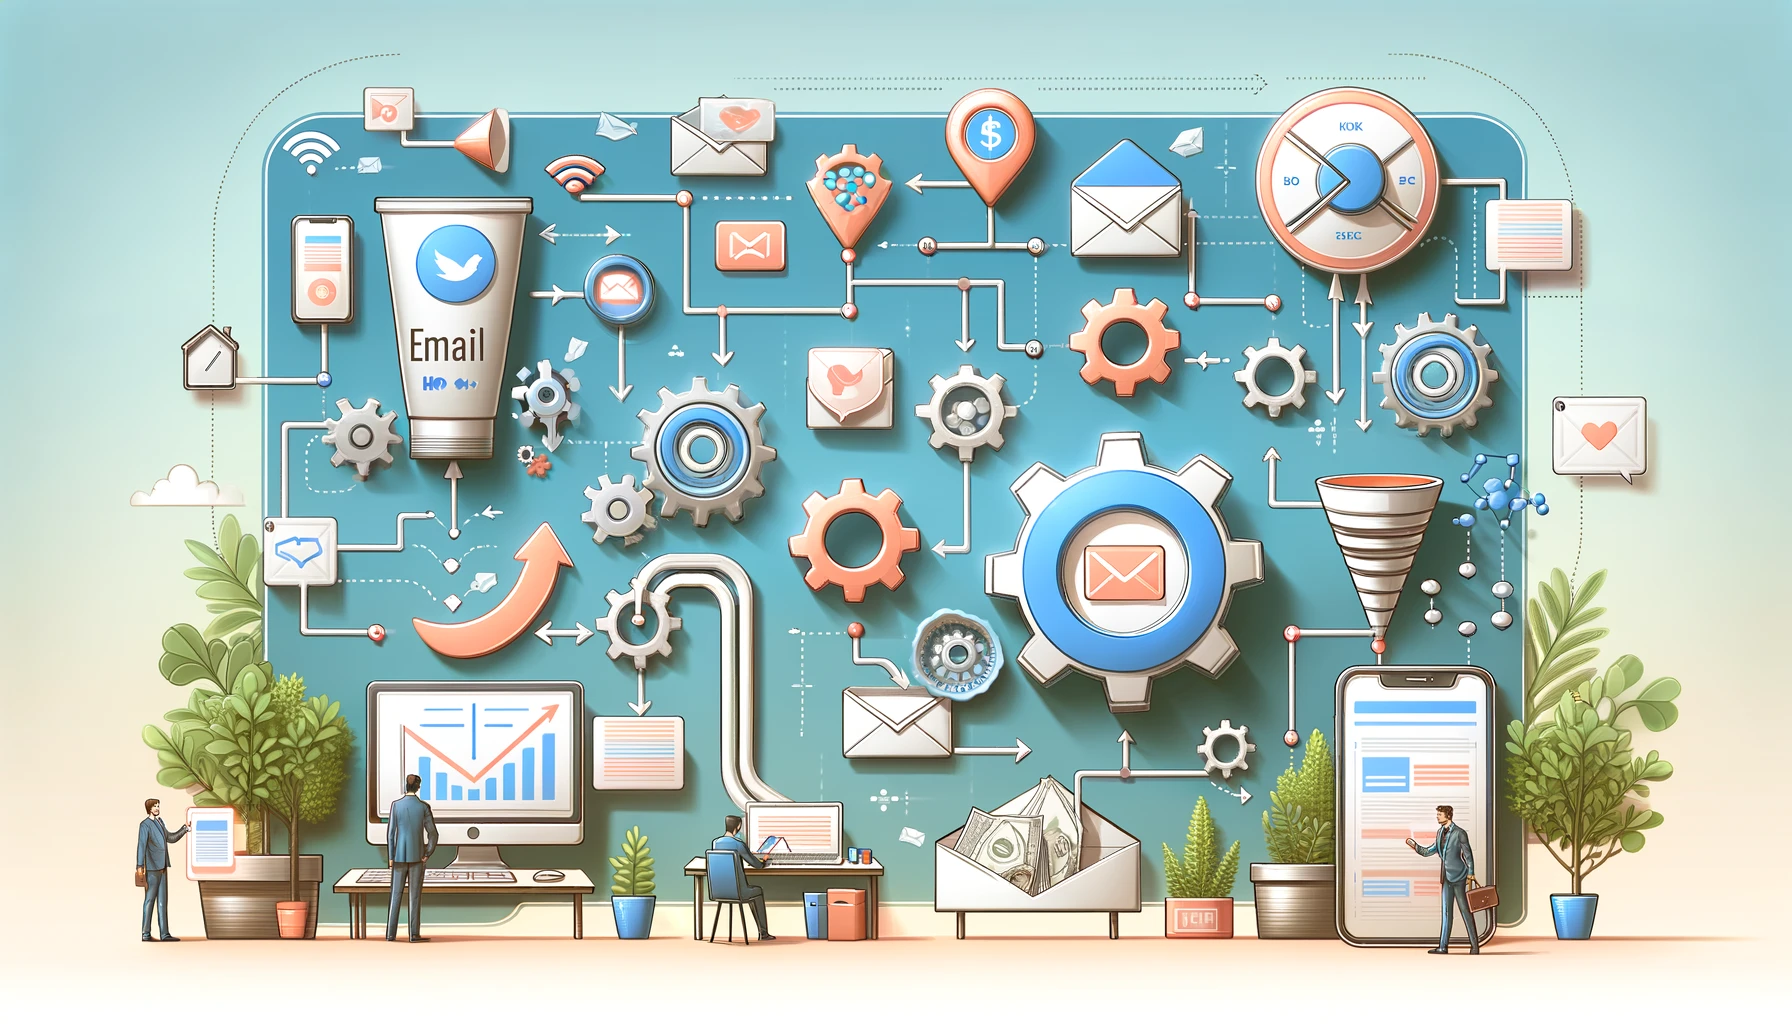 A conceptual image illustrating the essence of email marketing automation, showcasing interconnected marketing elements like emails, automation gears, and a digital marketing funnel, all harmonized within a modern digital environment.